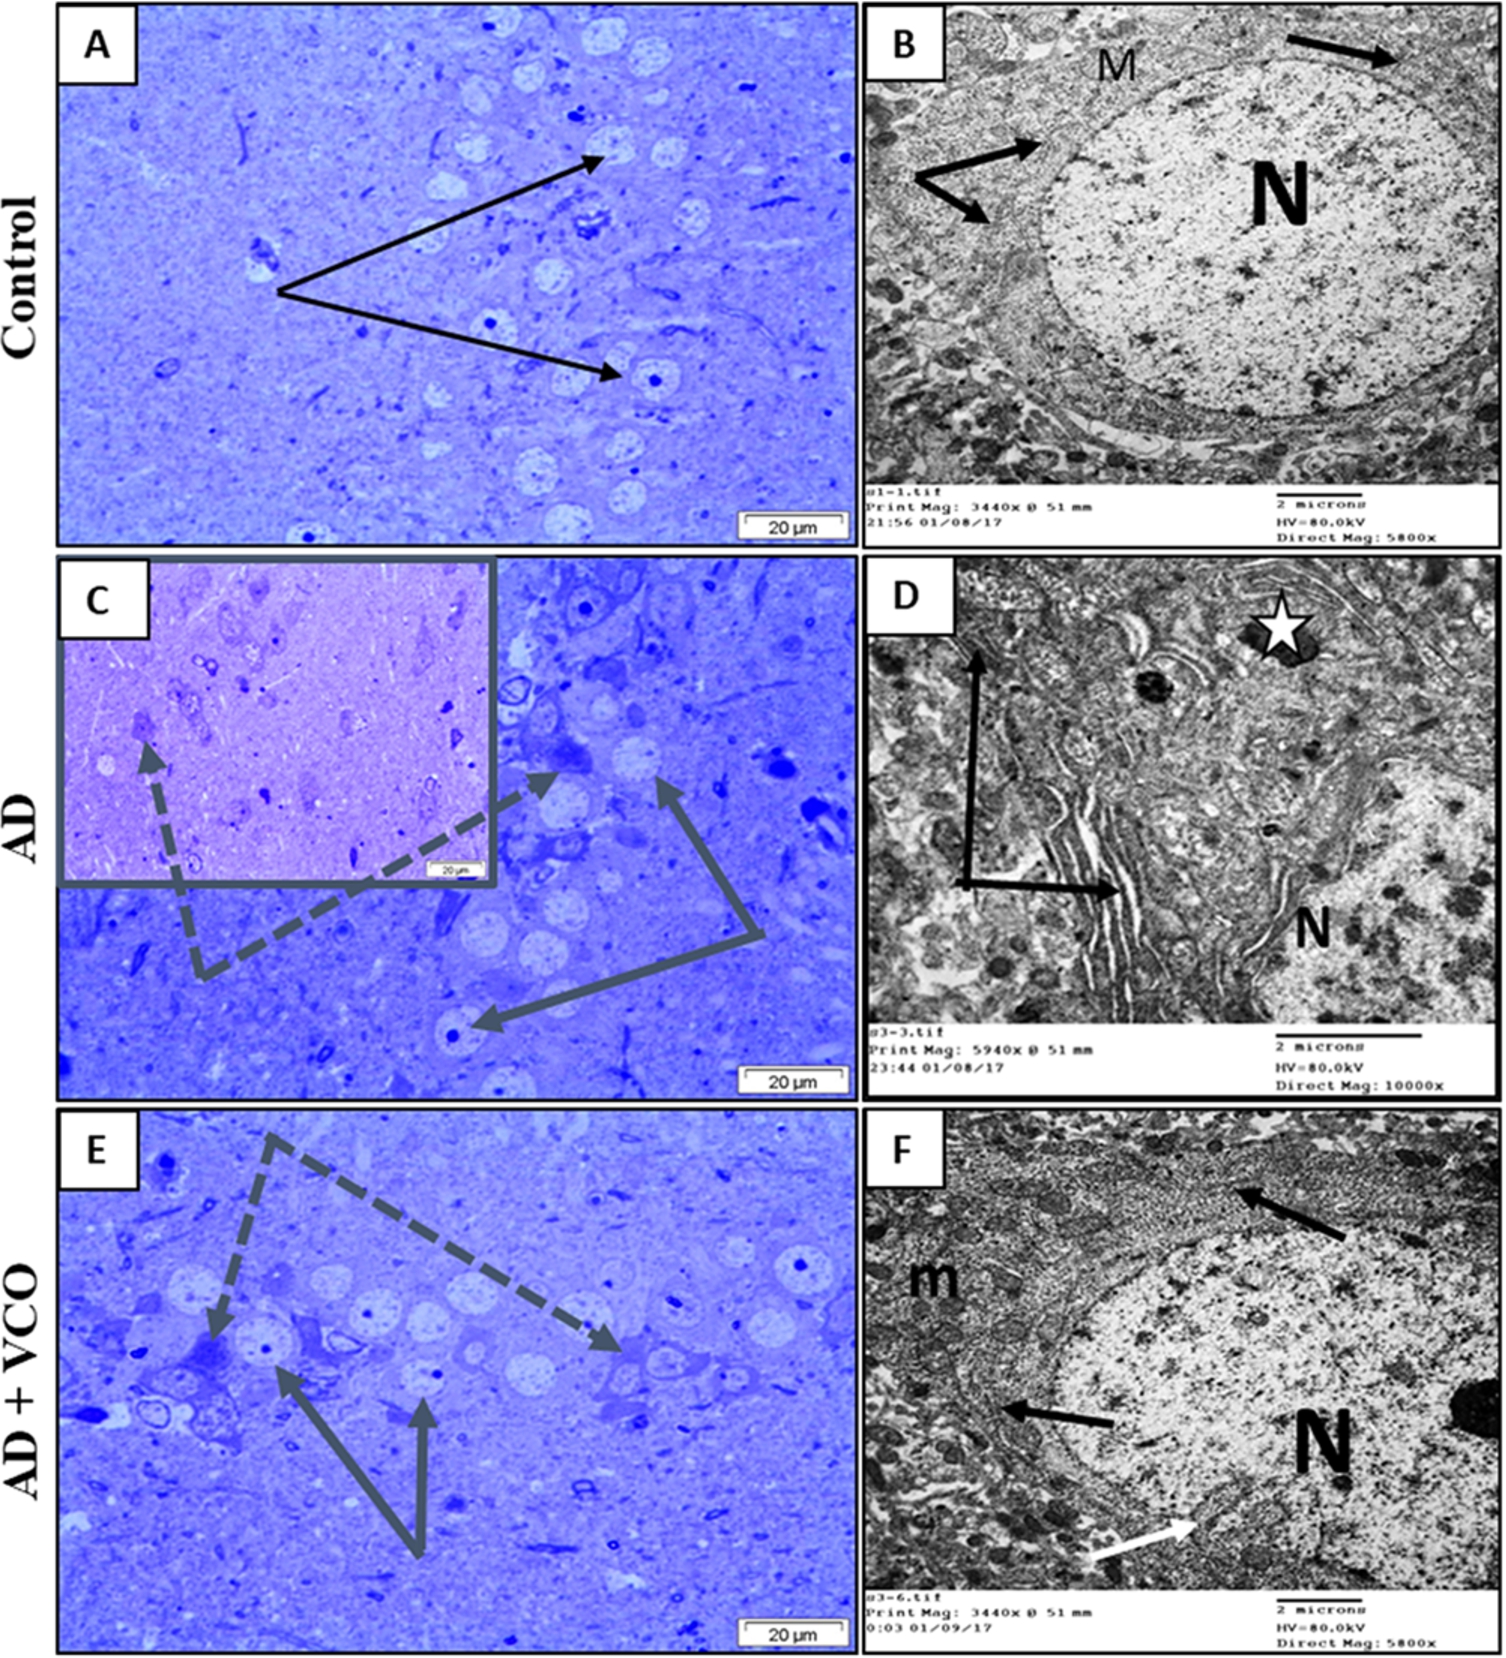 Semi-thin sections and electron-ultramicrographs of rat hippocampi of the three study groups. (A) Control: The semi-thin toluidine blue-stained section shows normal neurons with vesicular nuclei and prominent nucleoli (arrows). (B) Control: electron microscope micrograph shows a normal neuron with euchromatic nucleus (N), healthy cytoplasmic rER (black arrows) and mitochondria (M). (C) AD: Semi-thin sections show shrunken dark-stained neurons (dotted arrows). Cell nuclei are ill-defined, dark and degenerated. Few neurons looked normal with vesicular nuclei and prominent nucleoli (arrows). (D) AD: electron microscope micrograph shows a degenerated neuron with electron-dense cytoplasm and dilated rER depleted from ribosomes (black arrows). Dense bodies (lysosomes) can be seen (white star). The nucleus (N) shows clumped chromatin. (E) AD+VCO: Semi-thin sections show the preservation of normal viable neurons (black arrows). A few cells looked dark, shrunken and degenerated (dotted arrow). (F) AD+VCO: electron microscope micrograph shows a nearly normal neuron with a euchromatic nucleus (N) and indented envelope (white arrow). The cytoplasm contains normal rER (black arrows) and mitochondria (M). Scale bar=20μm in A, C and E and 2 μm in B, D and F.